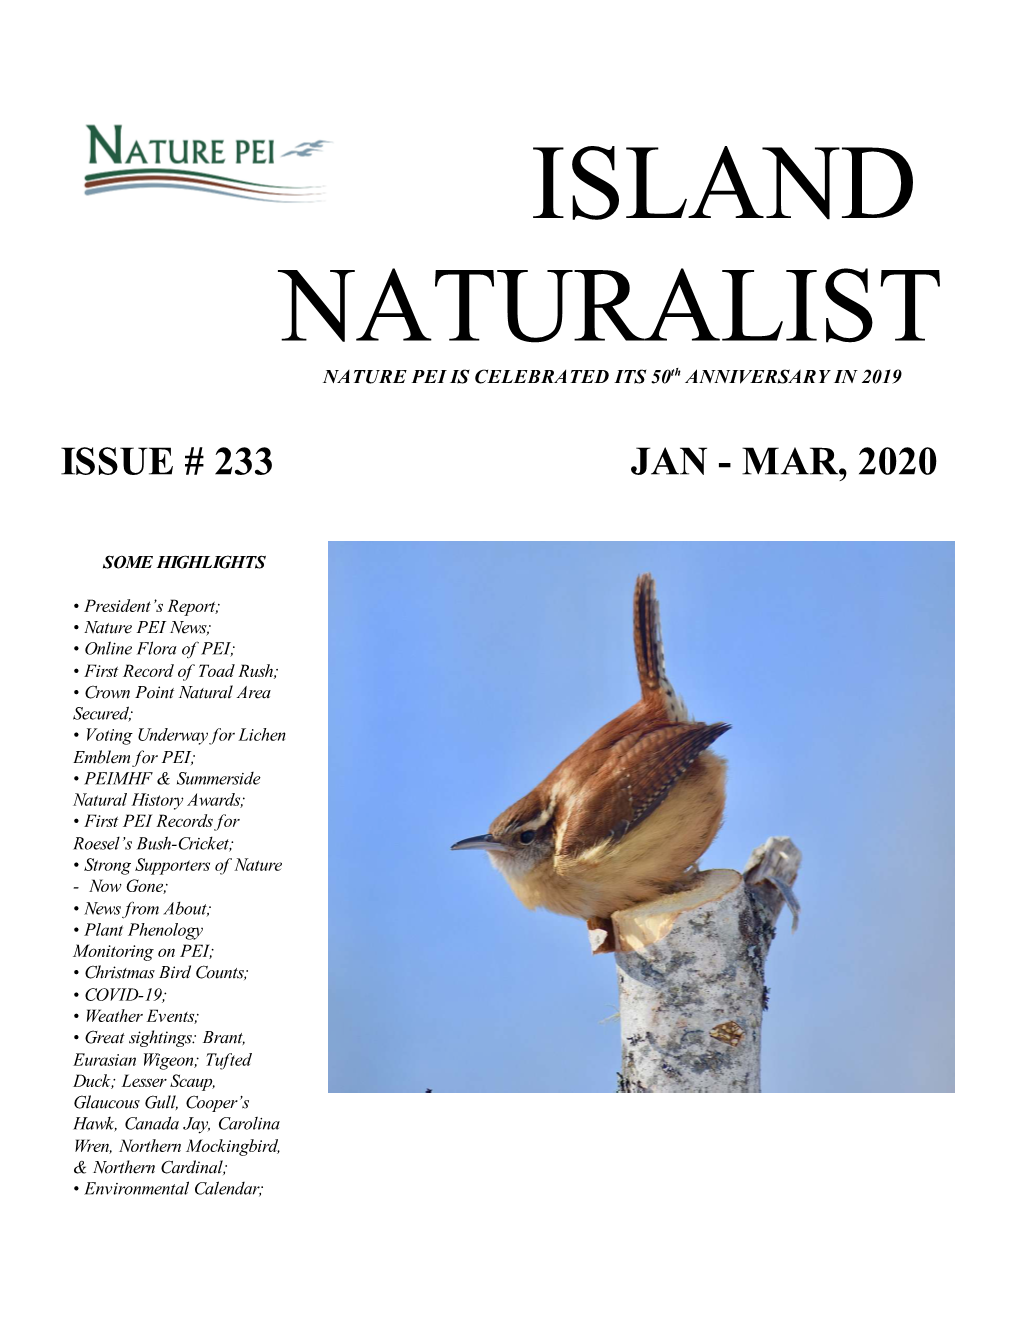 ISLAND NATURALIST NATURE PEI IS CELEBRATED ITS 50Th ANNIVERSARY in 2019